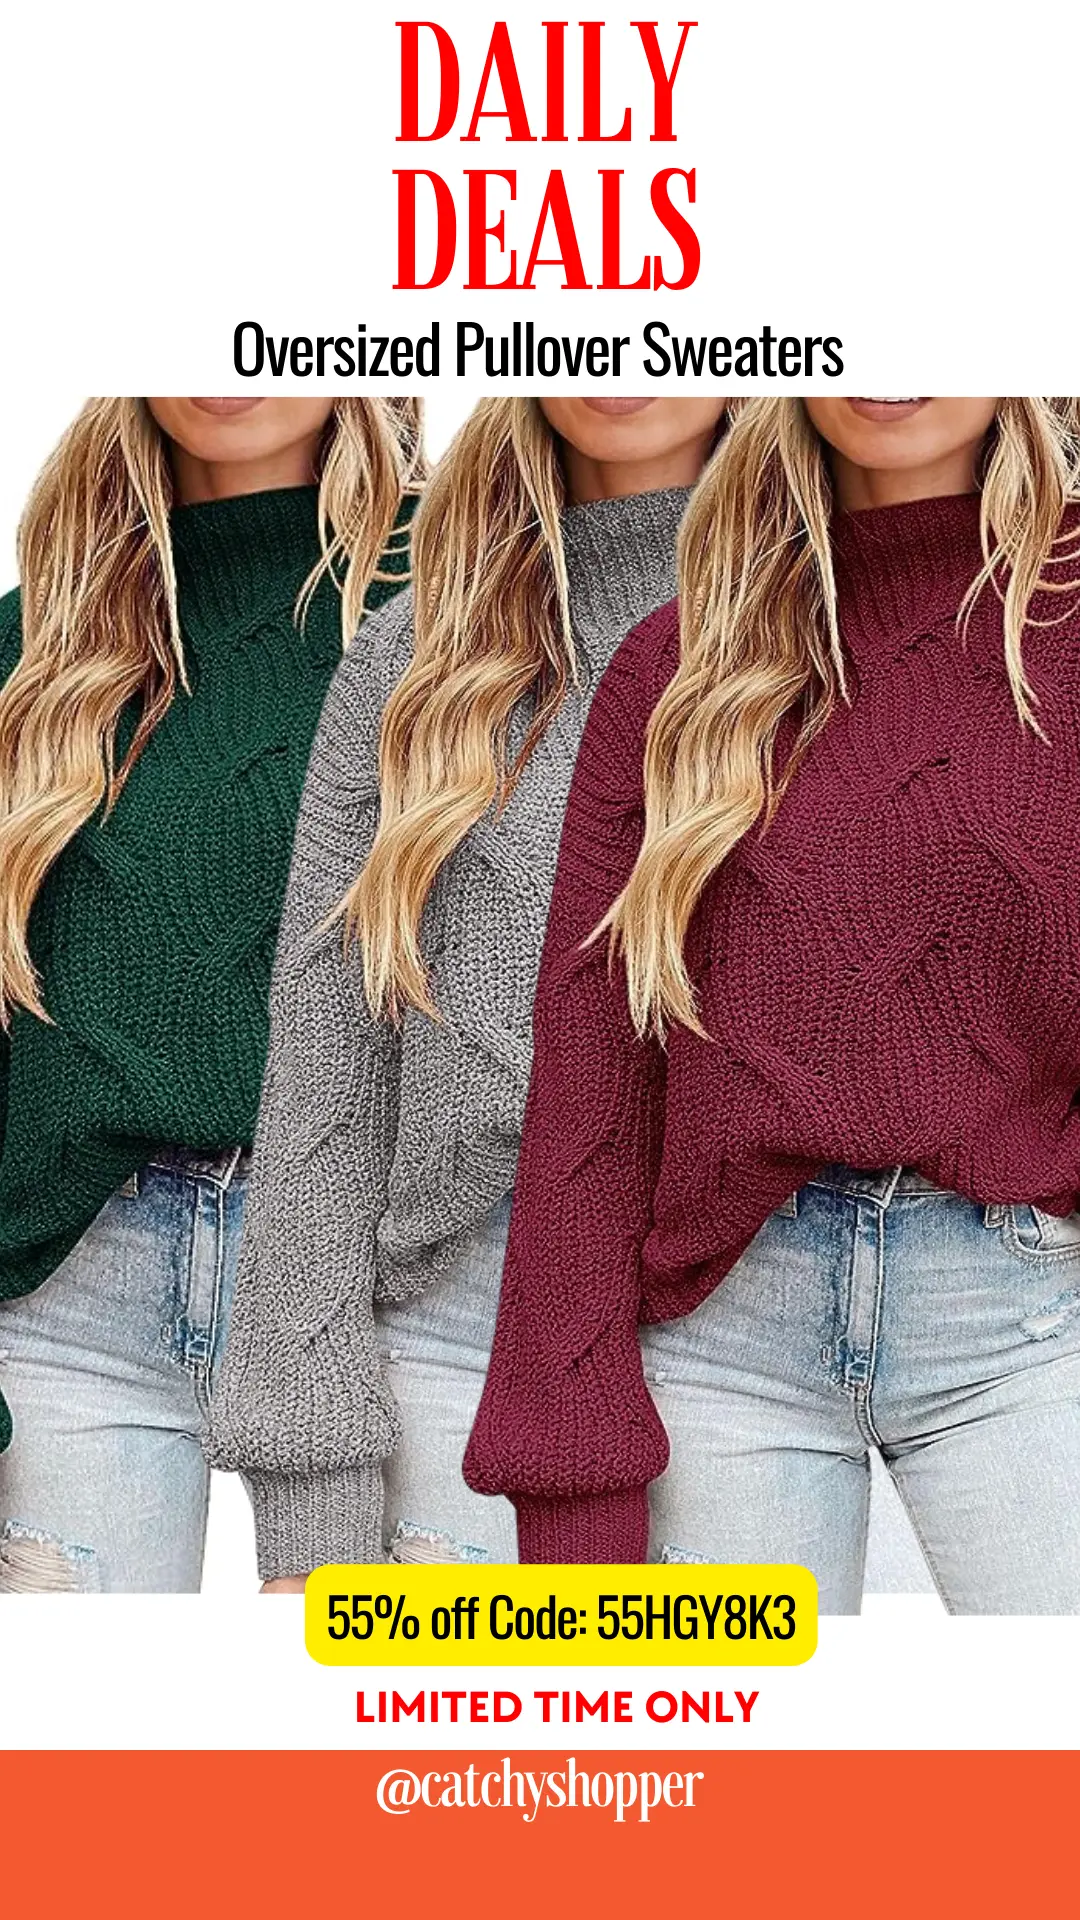 Oversized Pullover Sweaters